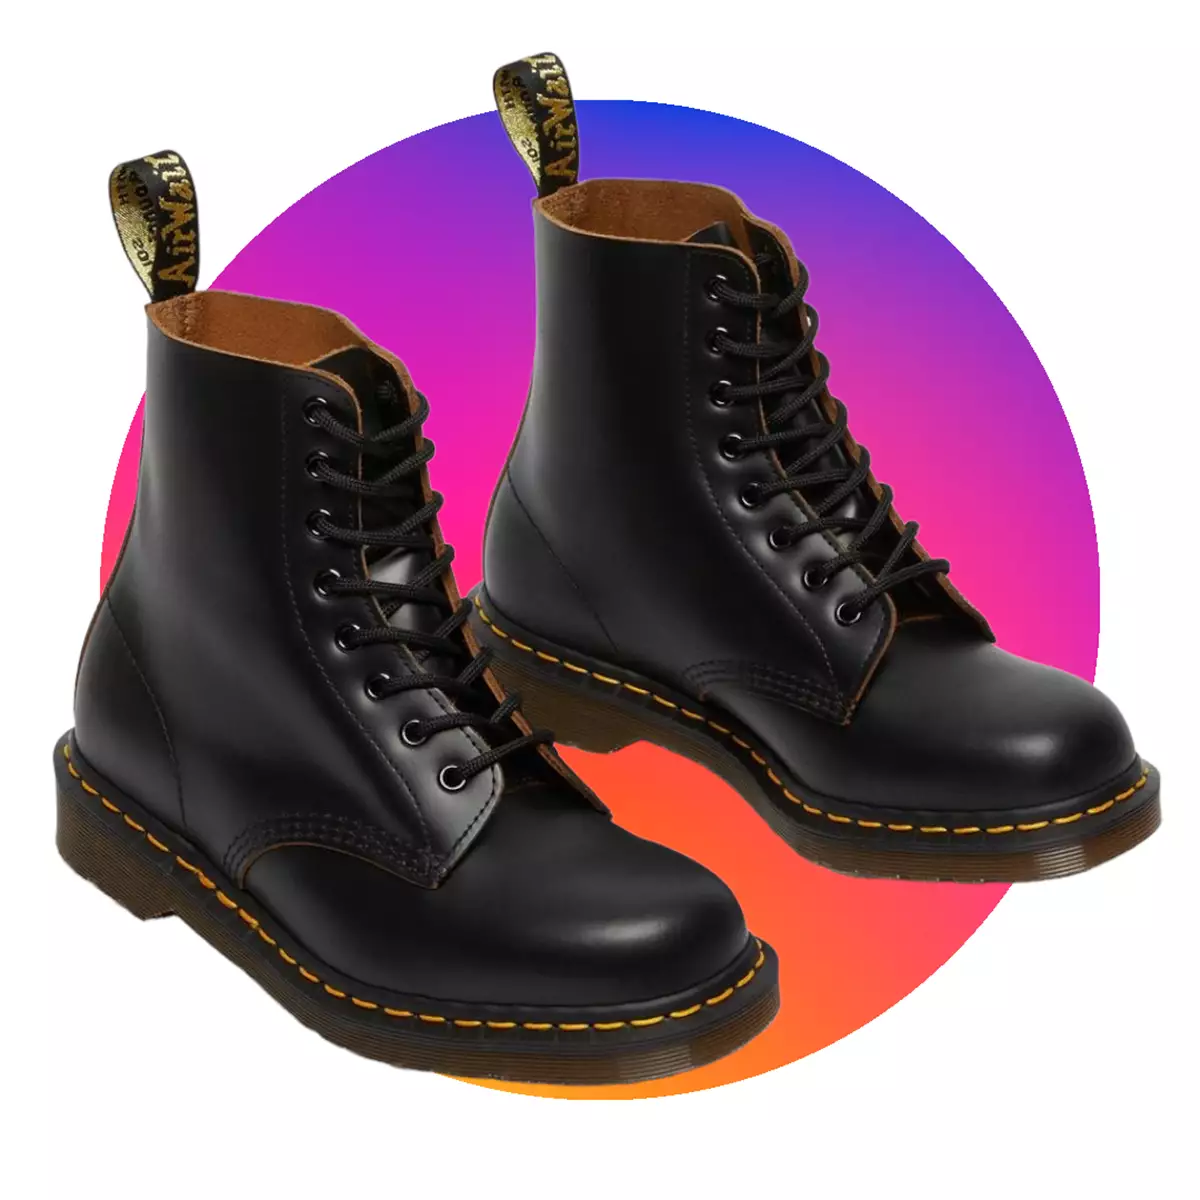 Gift Christmas 2022 - Boots - Dr. Martens